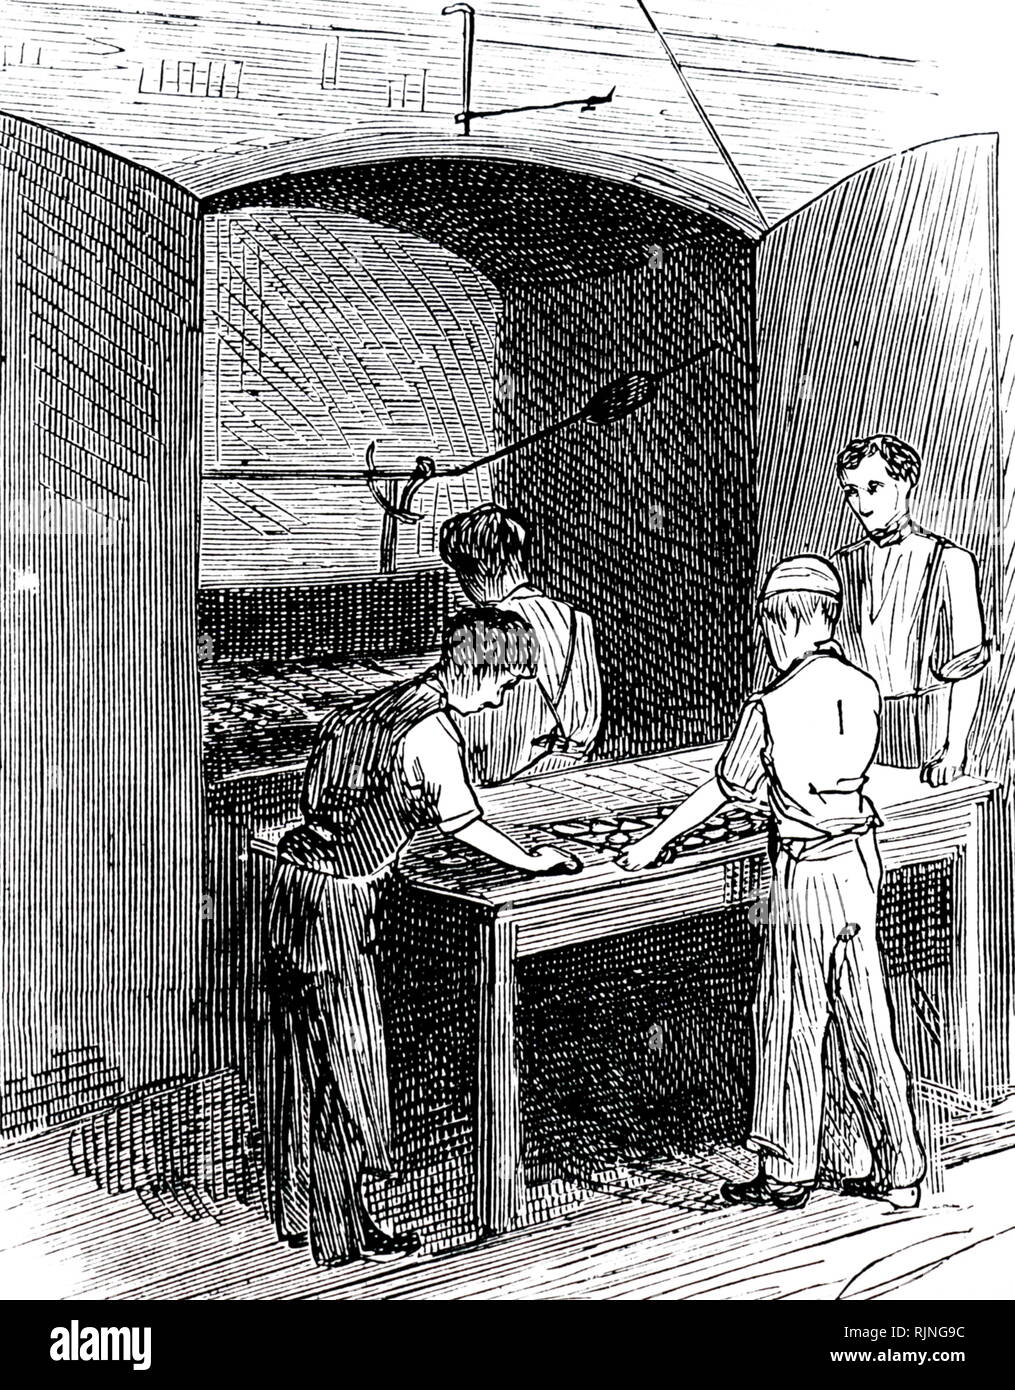 An engraving depicting biscuits going into the oven at Peek, Frean & Co.'s biscuit factory, Southwark Park, London. Dated 19th century Stock Photo